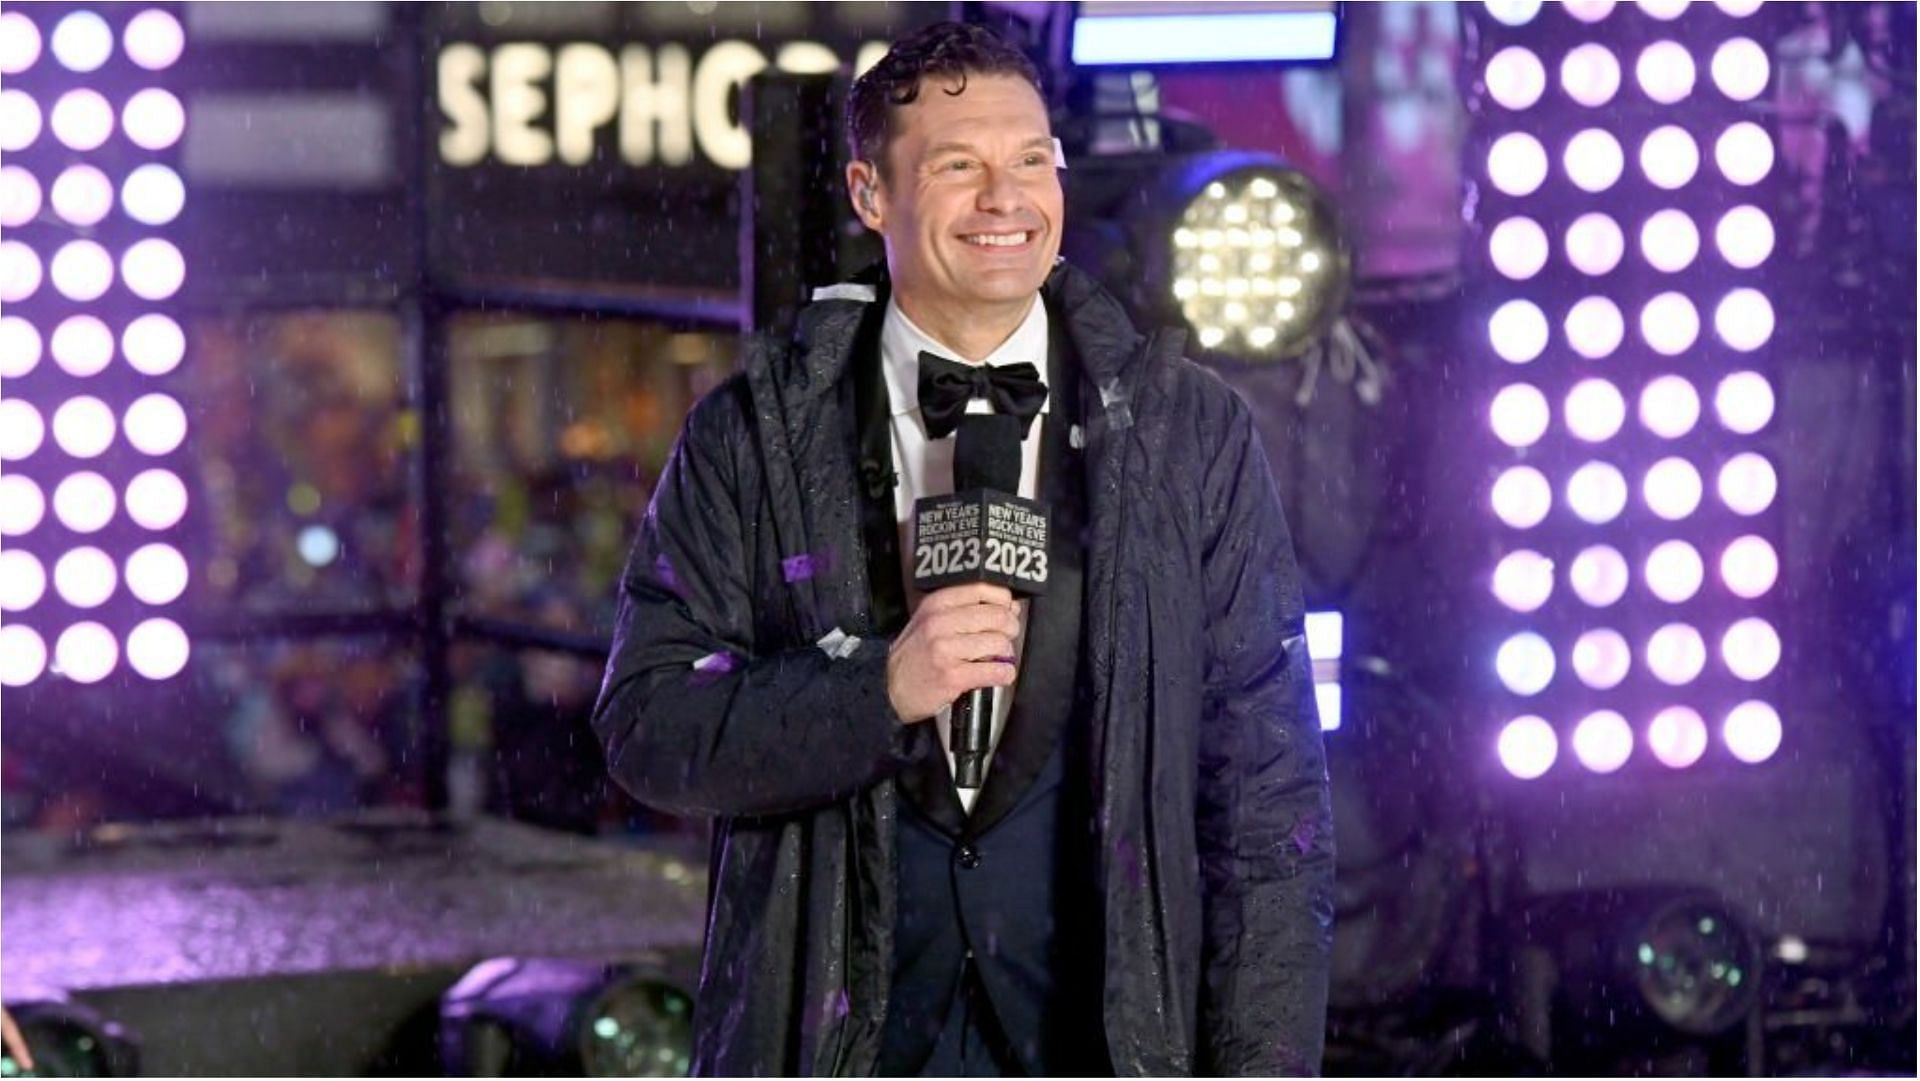 Ryan Seacrest has accumulated a lot of wealth from his appearances on television (Image via Noam Galai/Getty Images)